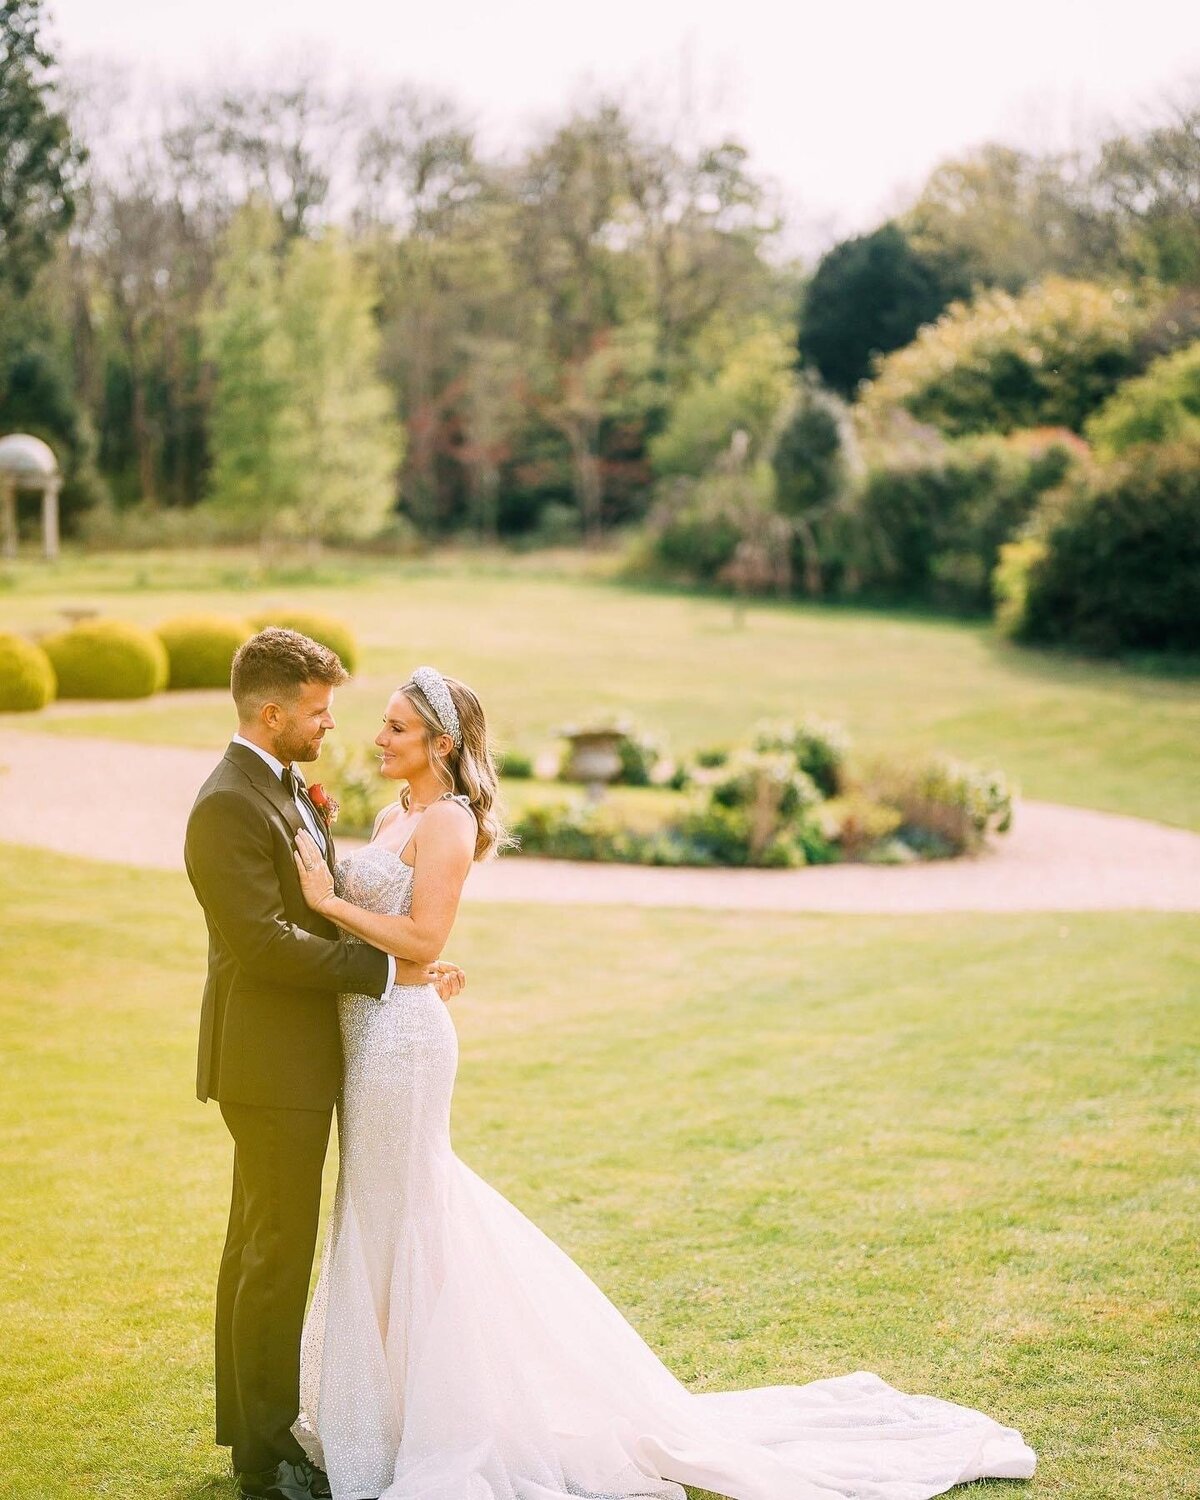 Bride and groom portraits on green outdoor lawn